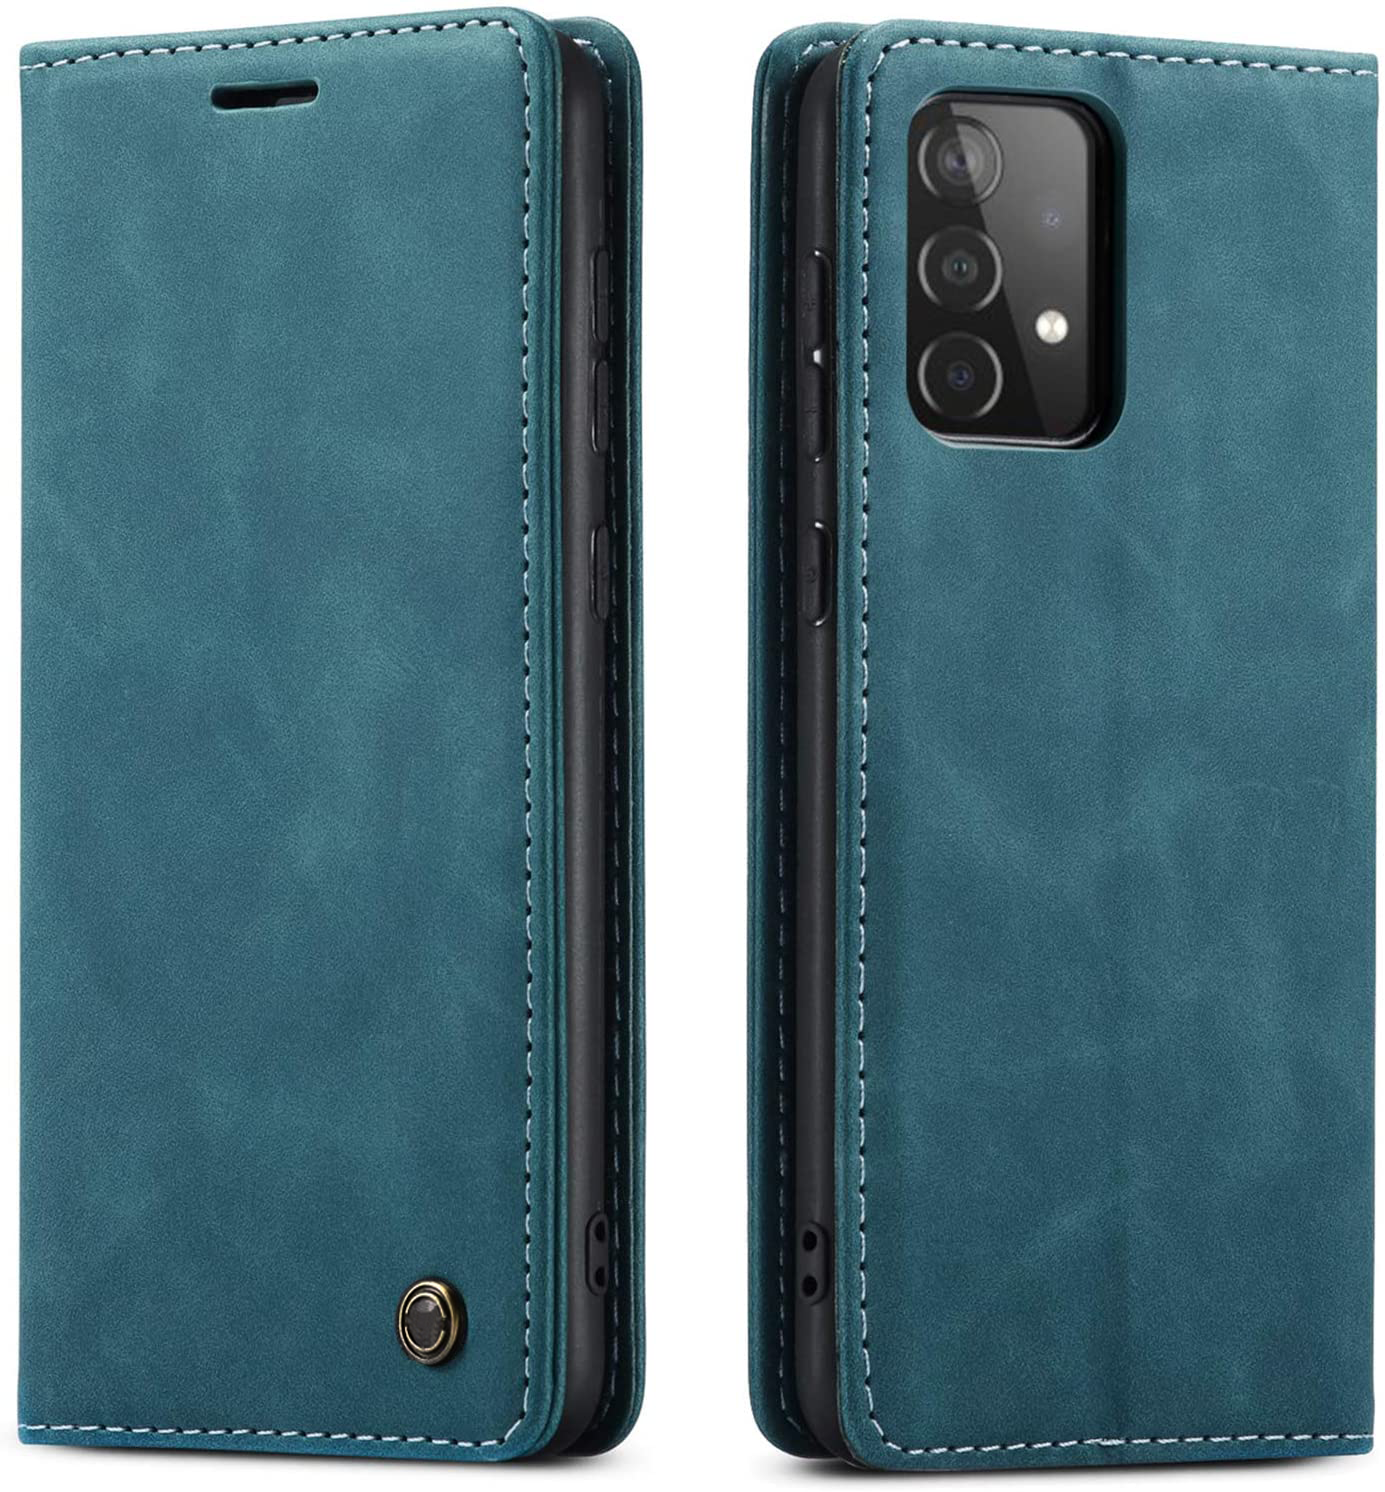 Samsung Galaxy A52 blue color leather wallet flip cover case By excelsior